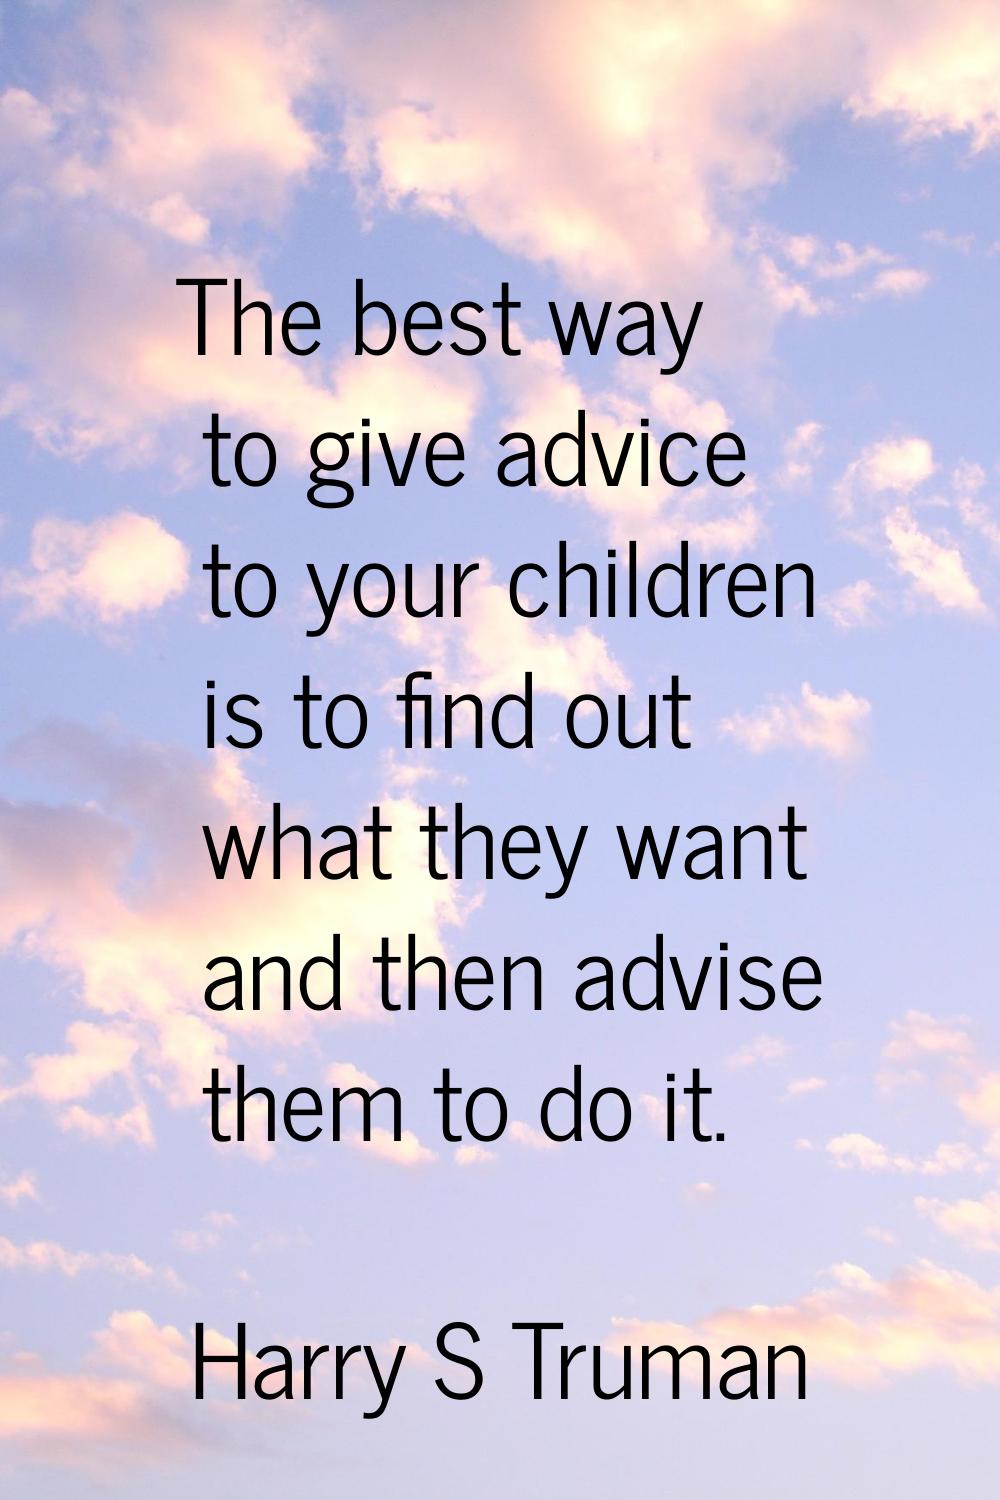 The best way to give advice to your children is to find out what they want and then advise them to 